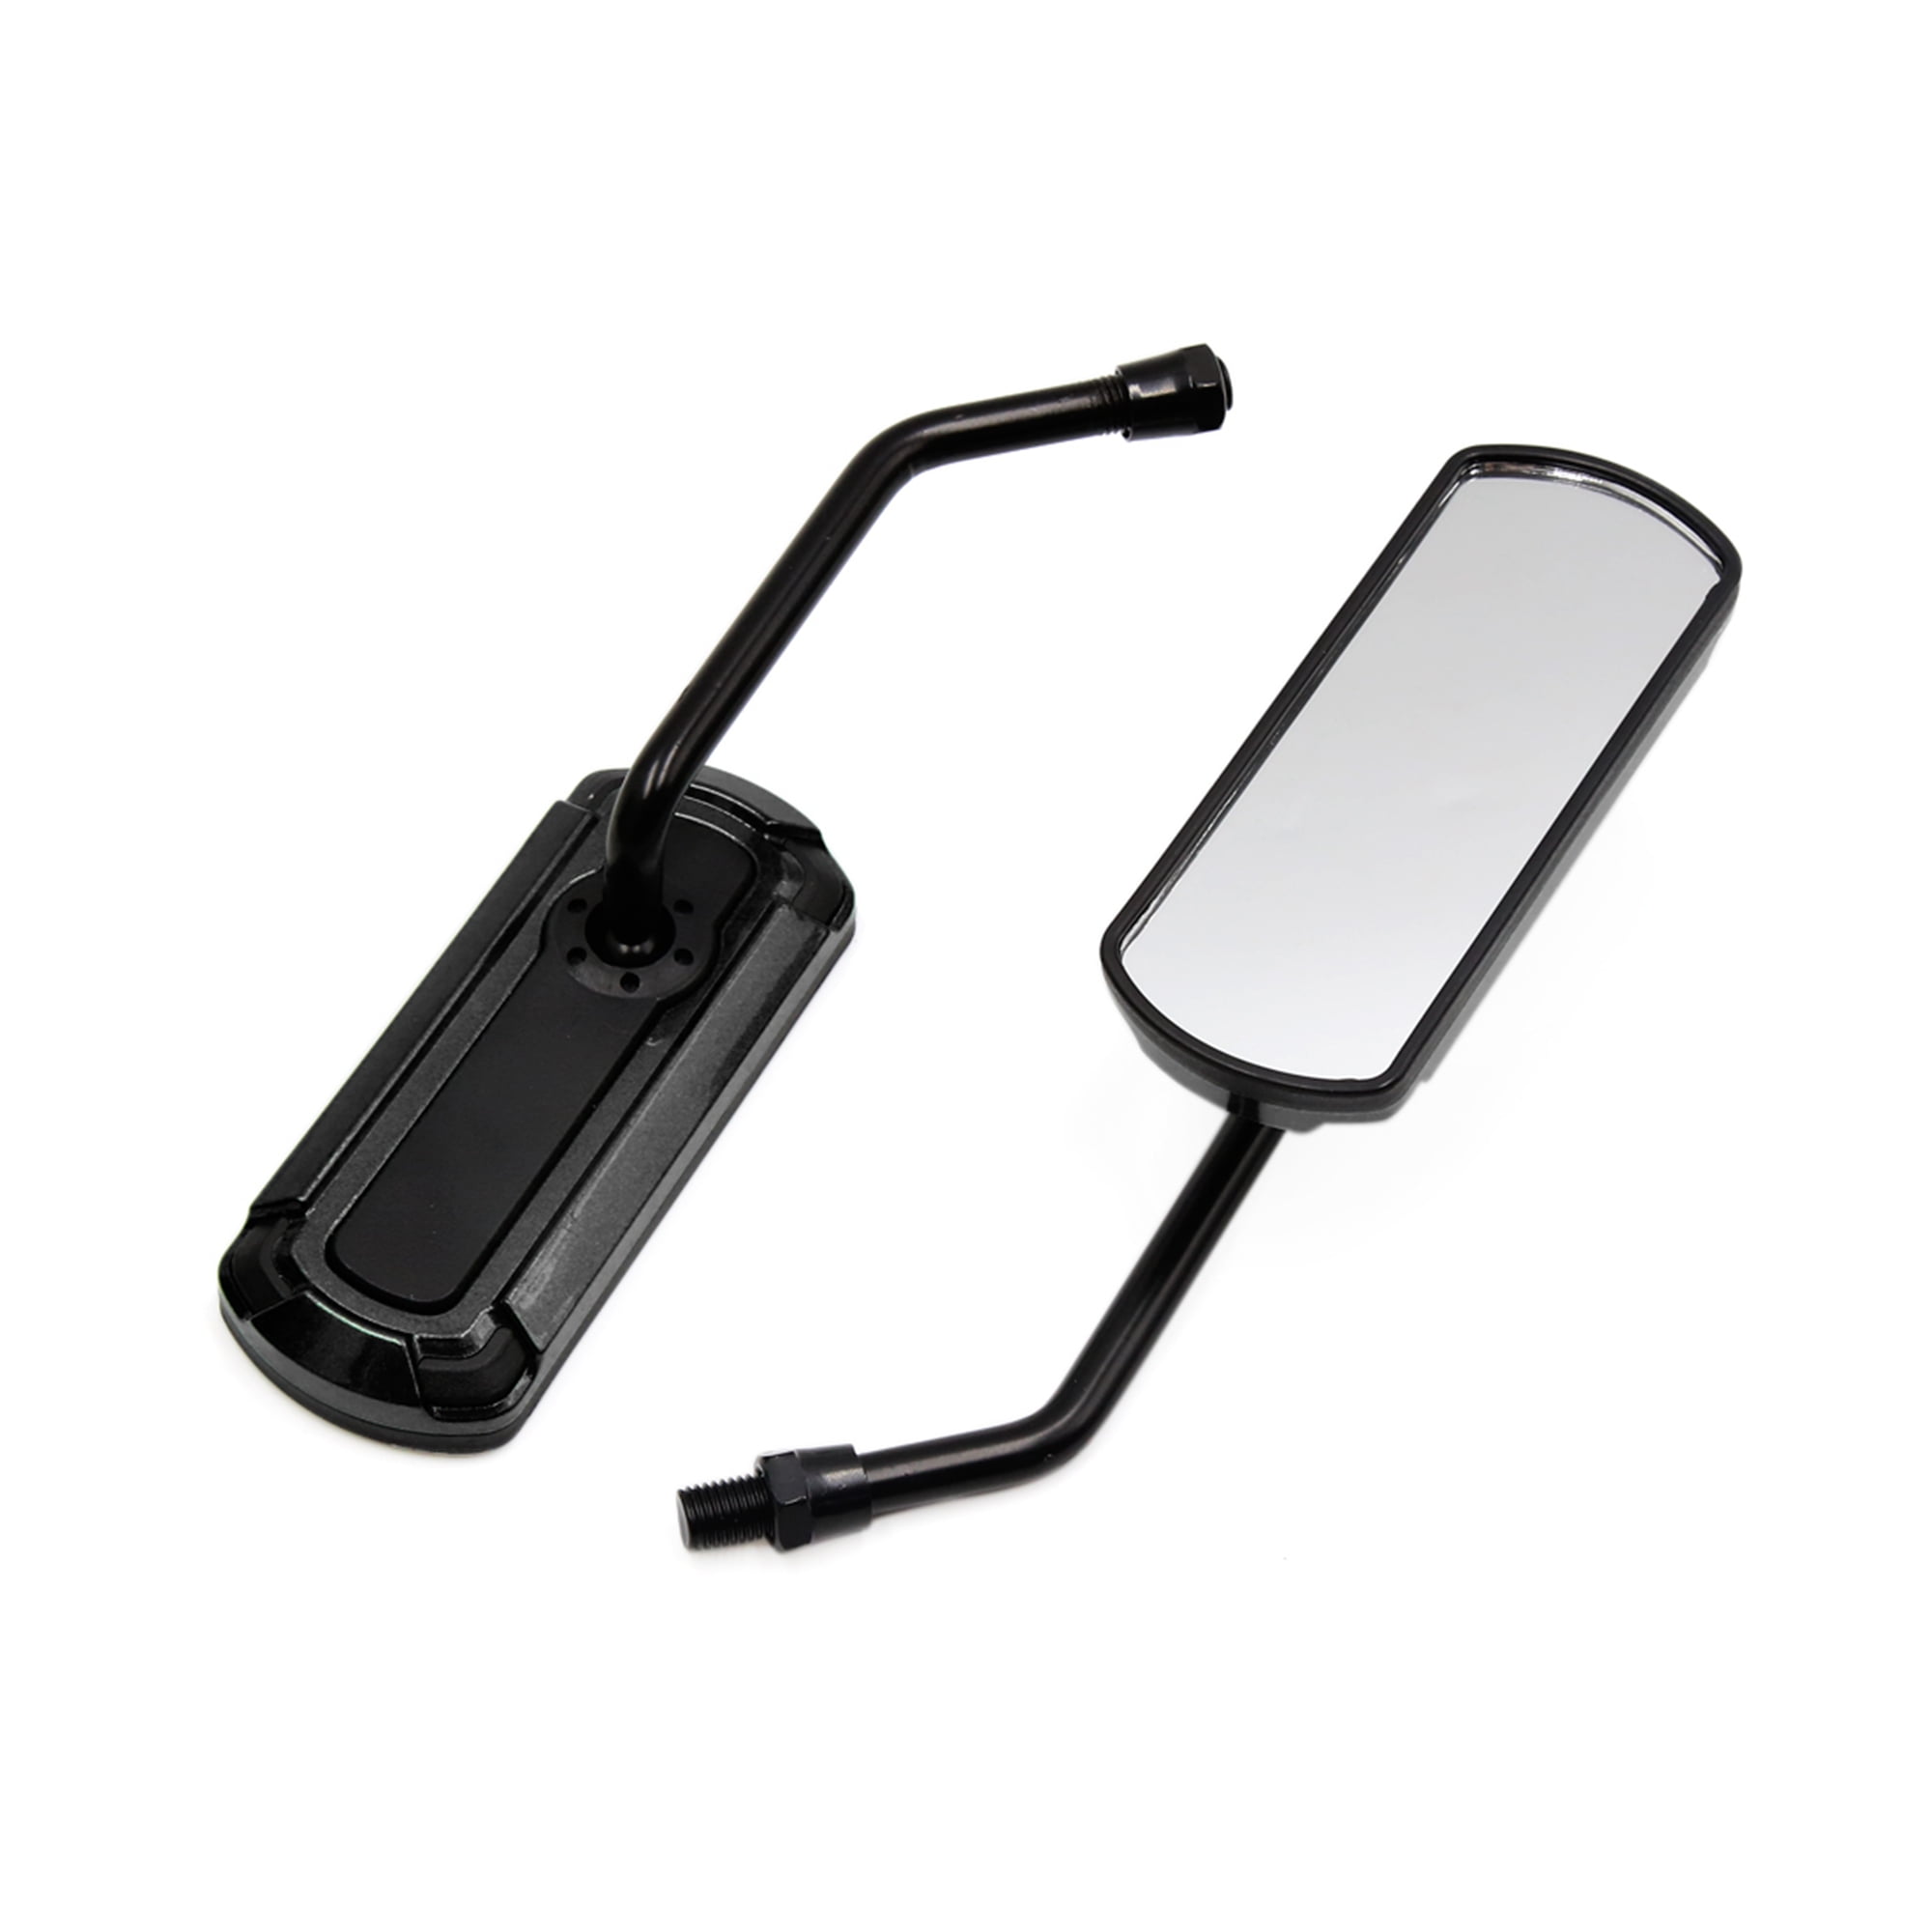 Motorcycle Rectangle Black Rear View Mirrors W/ Adapter Parts Set Kit For Harley